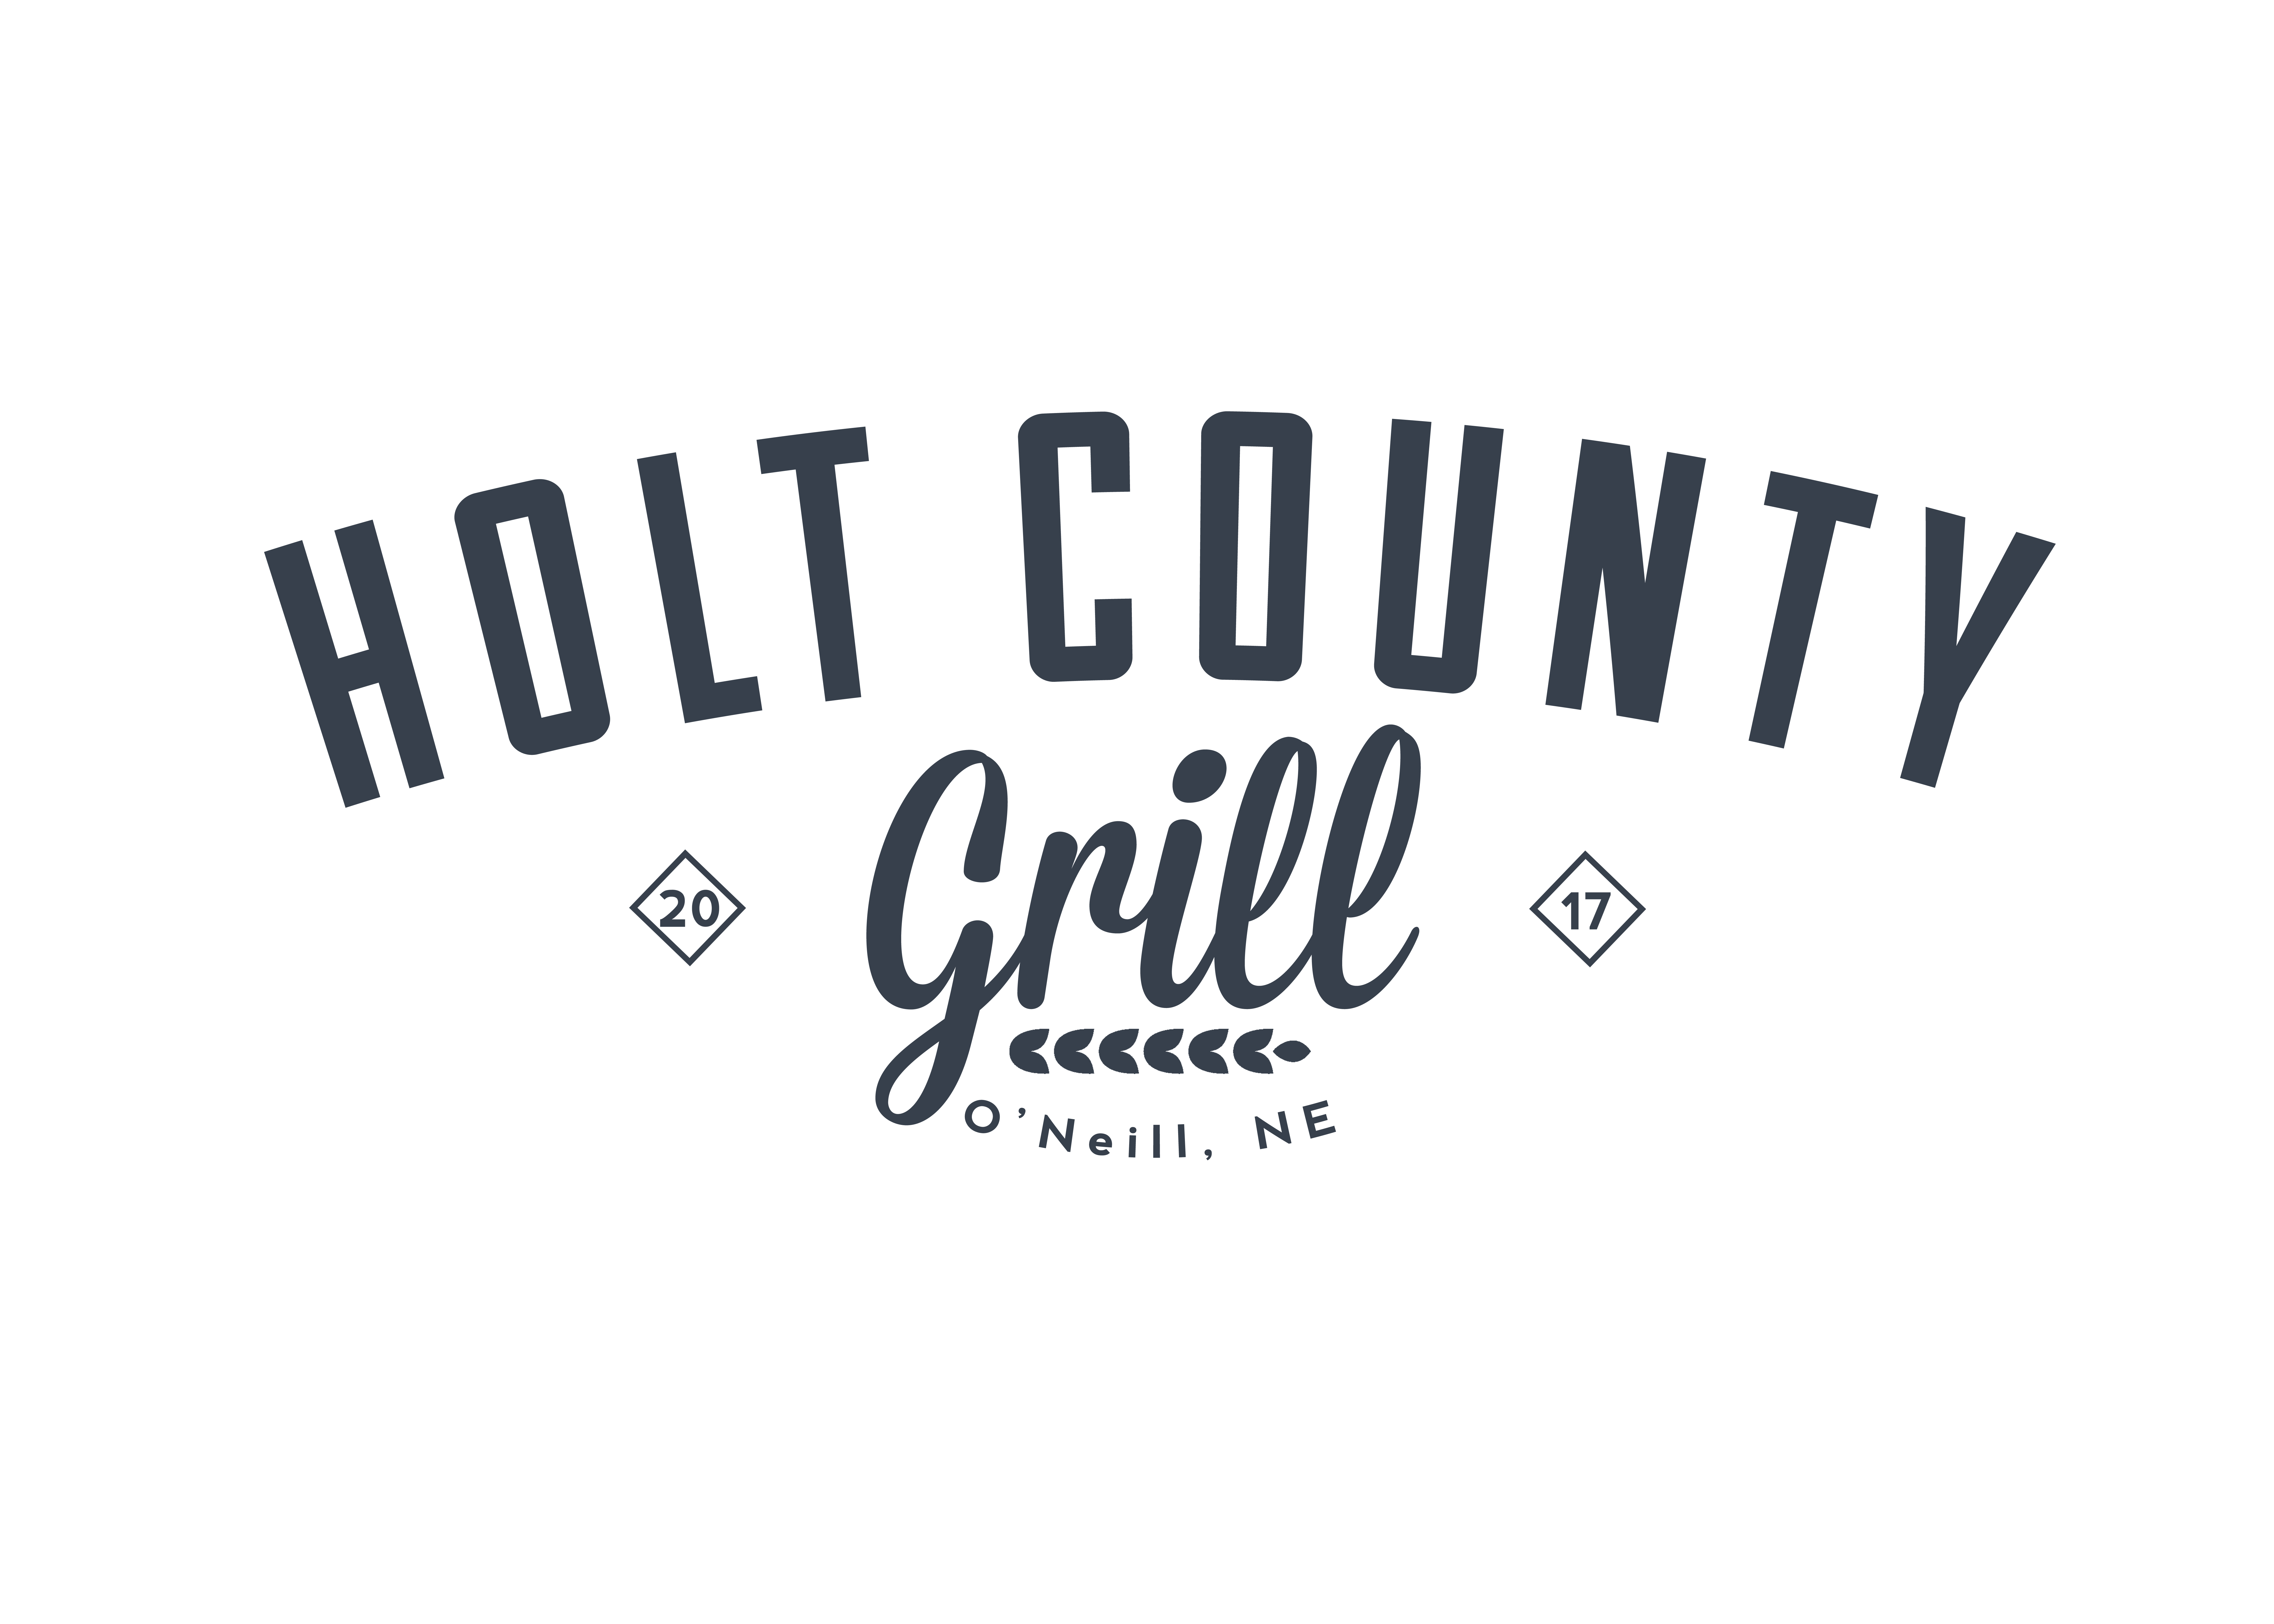 Holt County Grill